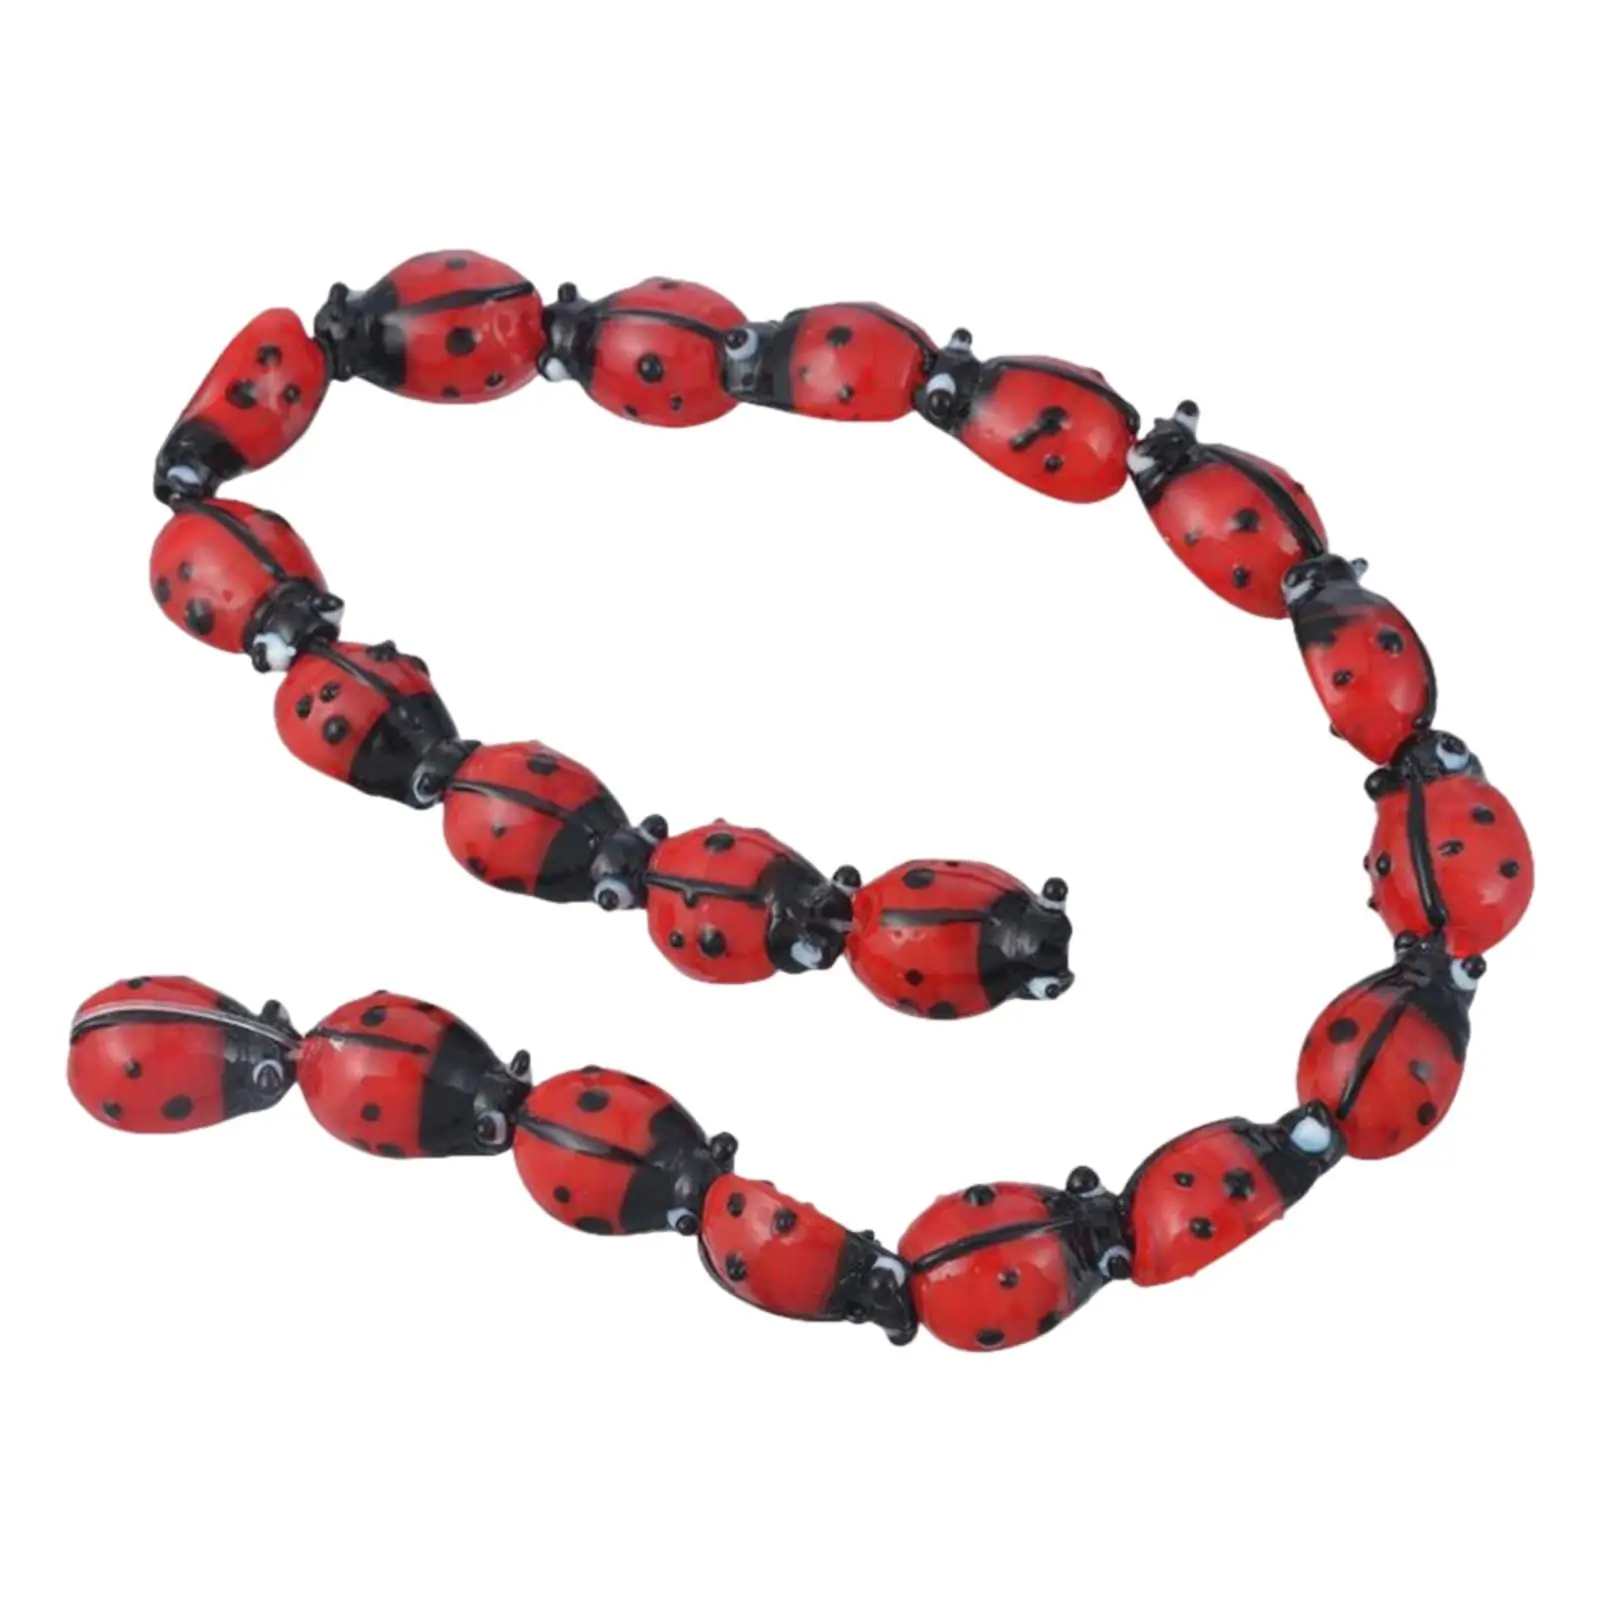 Cute Beetle Spacer Beads Kit DIY Crafts Red Accessories Supplies Small Carved for Pendant Craft Making Decoration Kids Earrings